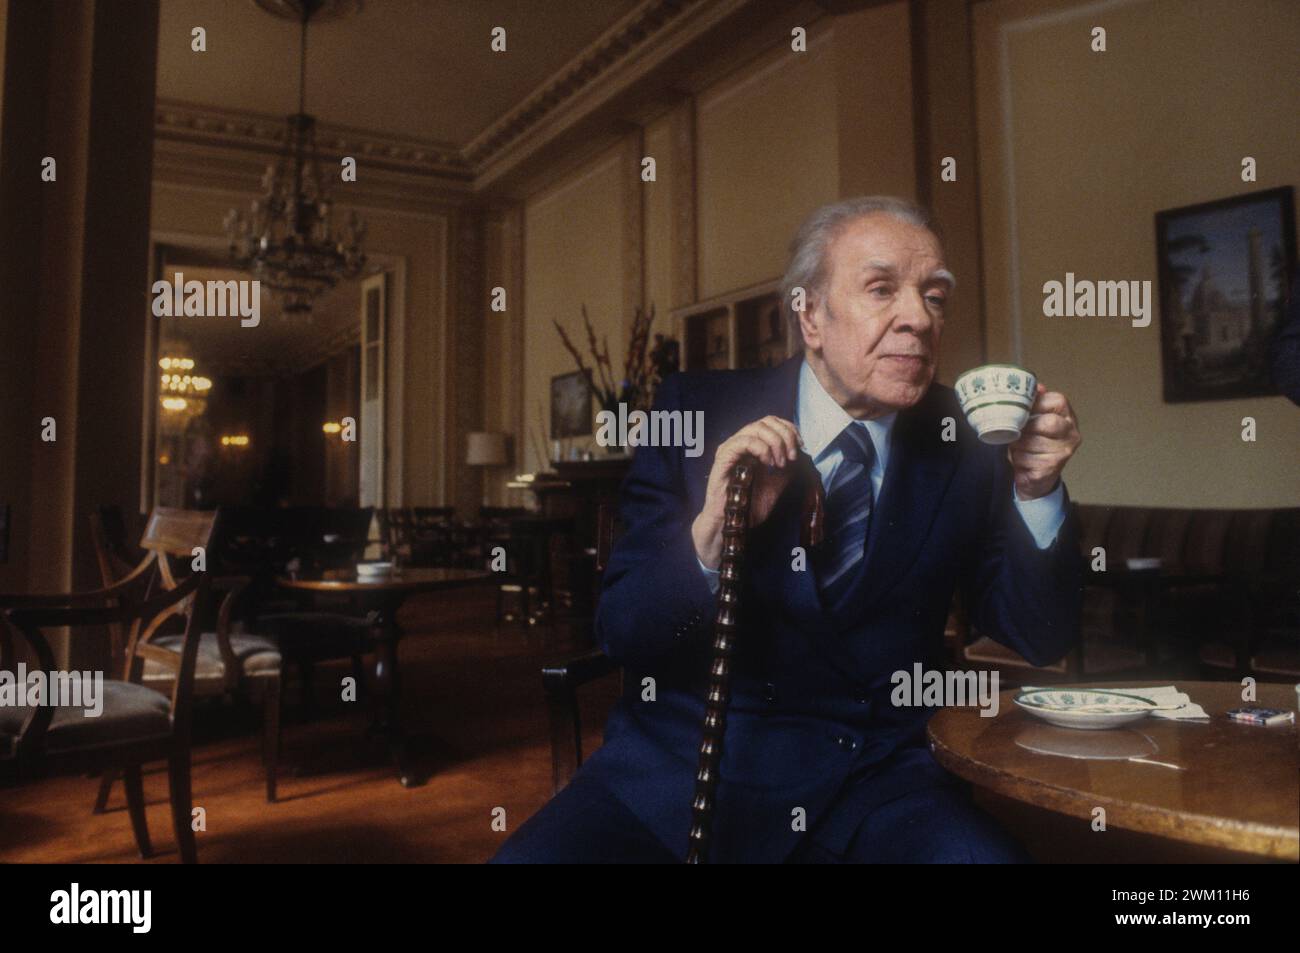 3825307 Jorge Luis Borges; (add.info.: Rome, Westin Excelsior Hotel, 1981. Argentinian writer Jorge Luis Borges / Roma, Hotel Westin Excelsior, 1981. Lo scrittore argentino Jorge Luis Borges); © Marcello Mencarini. All rights reserved 2024. Stock Photo